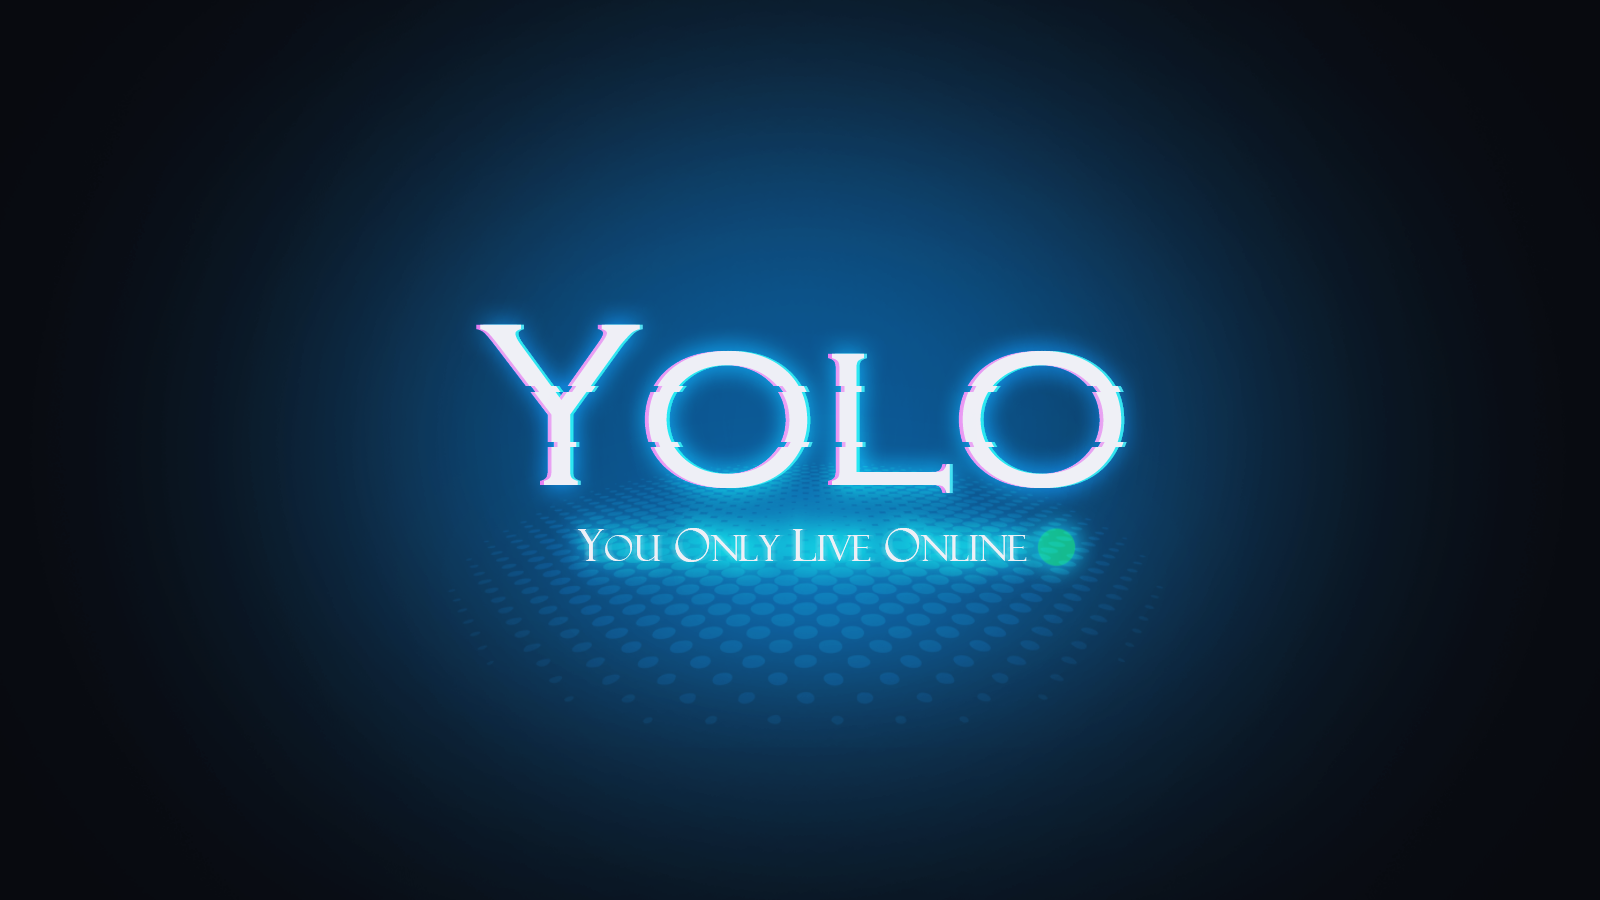 YOLO wallpaper by electricgirl  Download on ZEDGE  0636